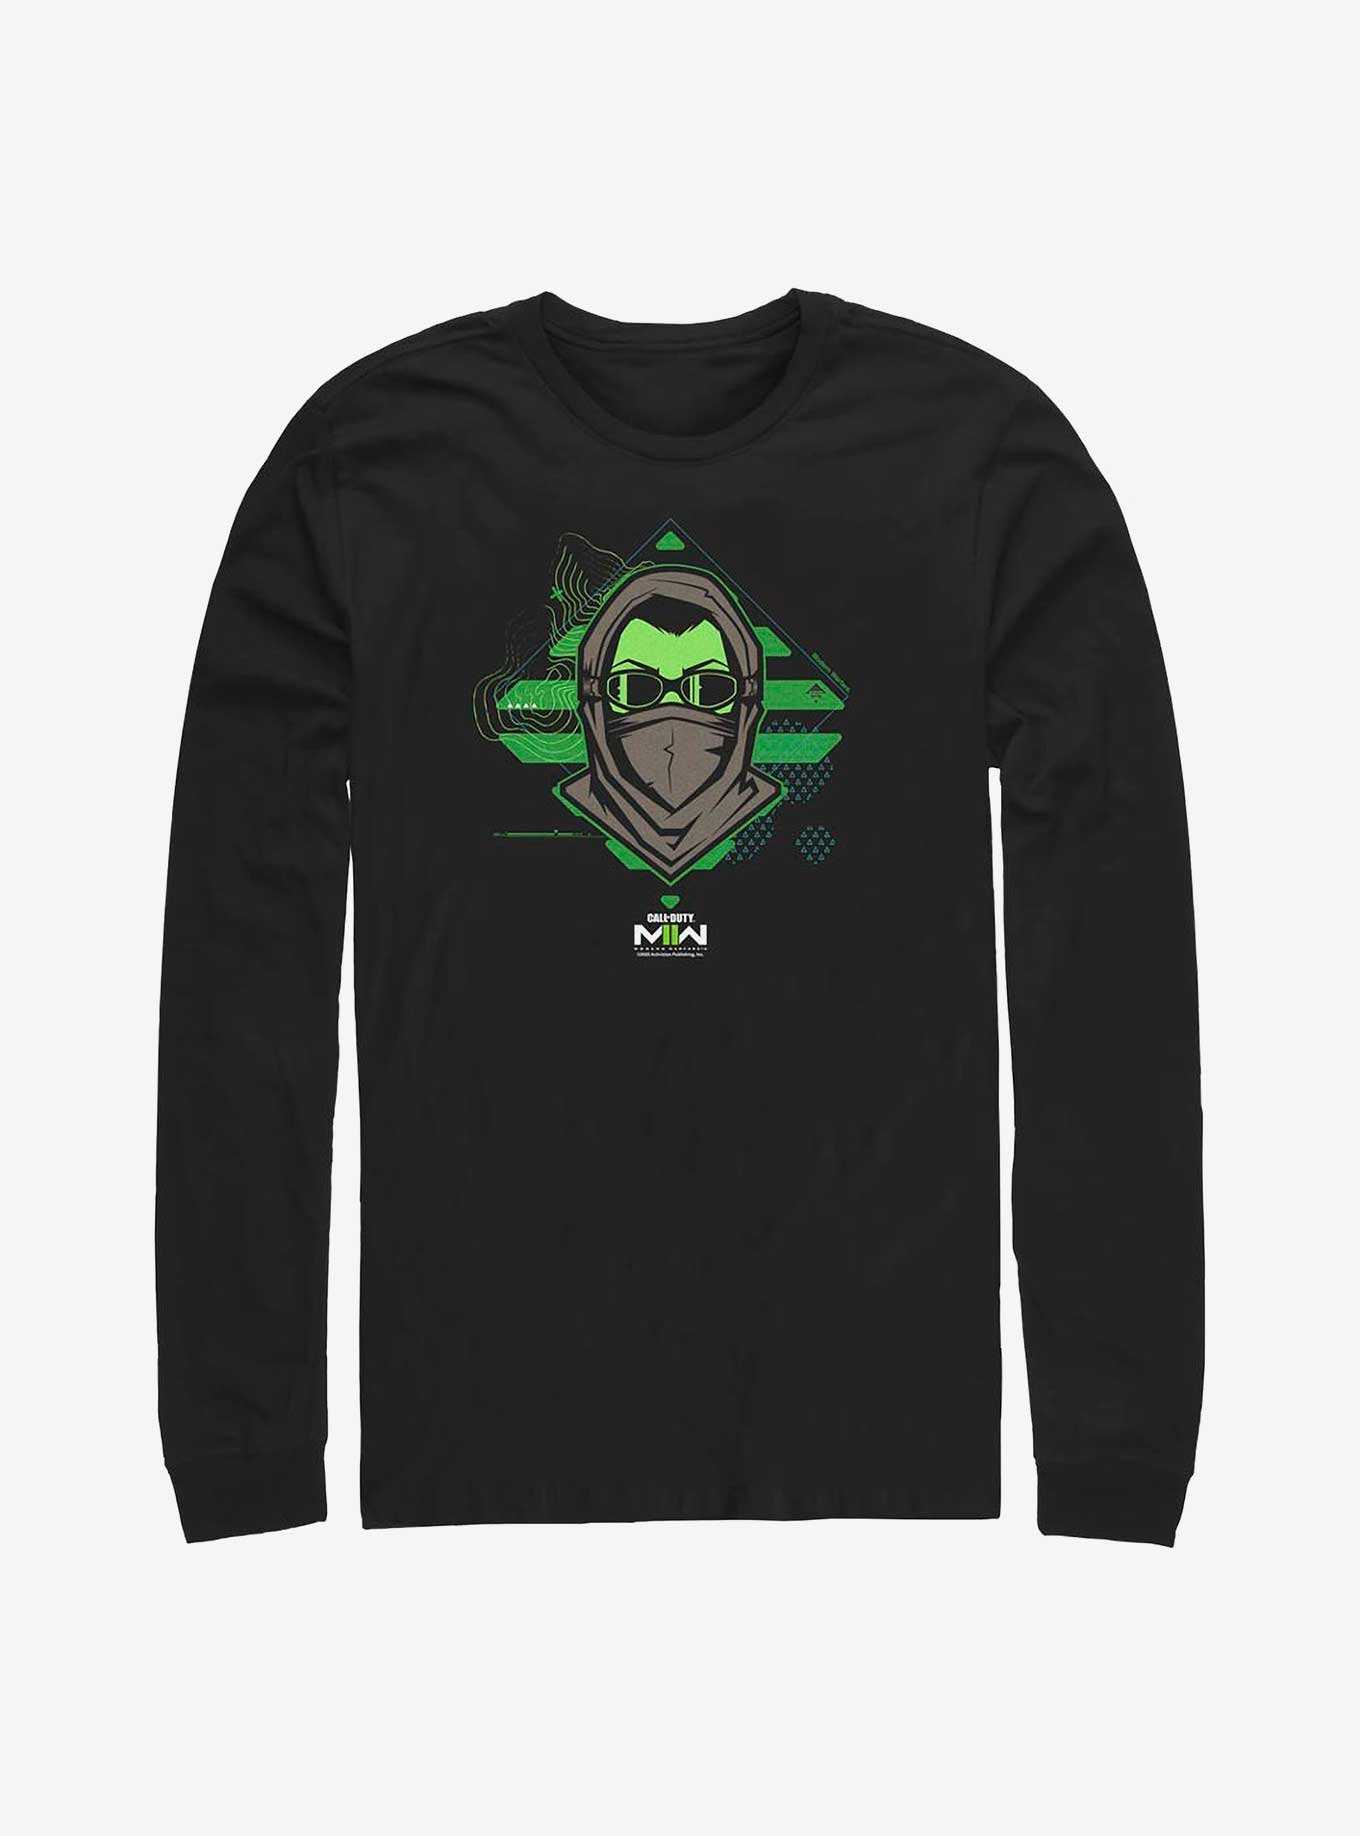 Call Of Duty Stealth Sniper Long Sleeve T-Shirt, , hi-res